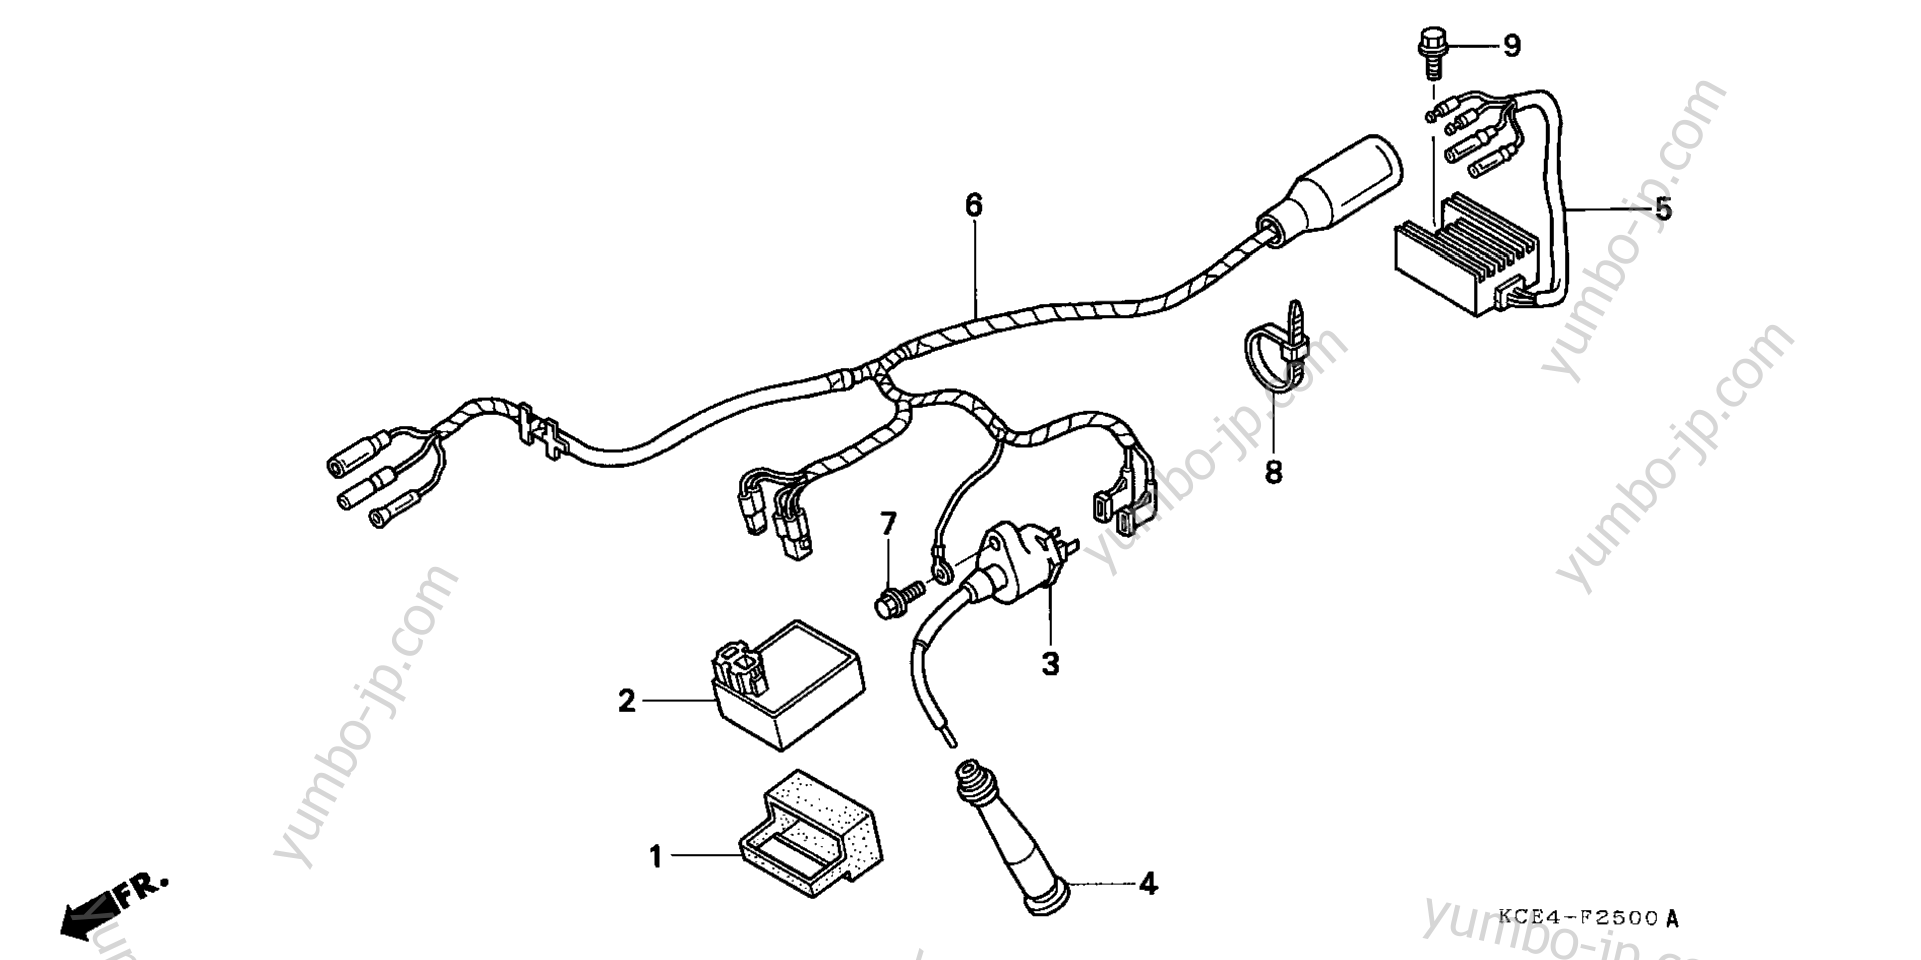 WIRE HARNESS for motorcycles HONDA XR250R A/A 2004 year